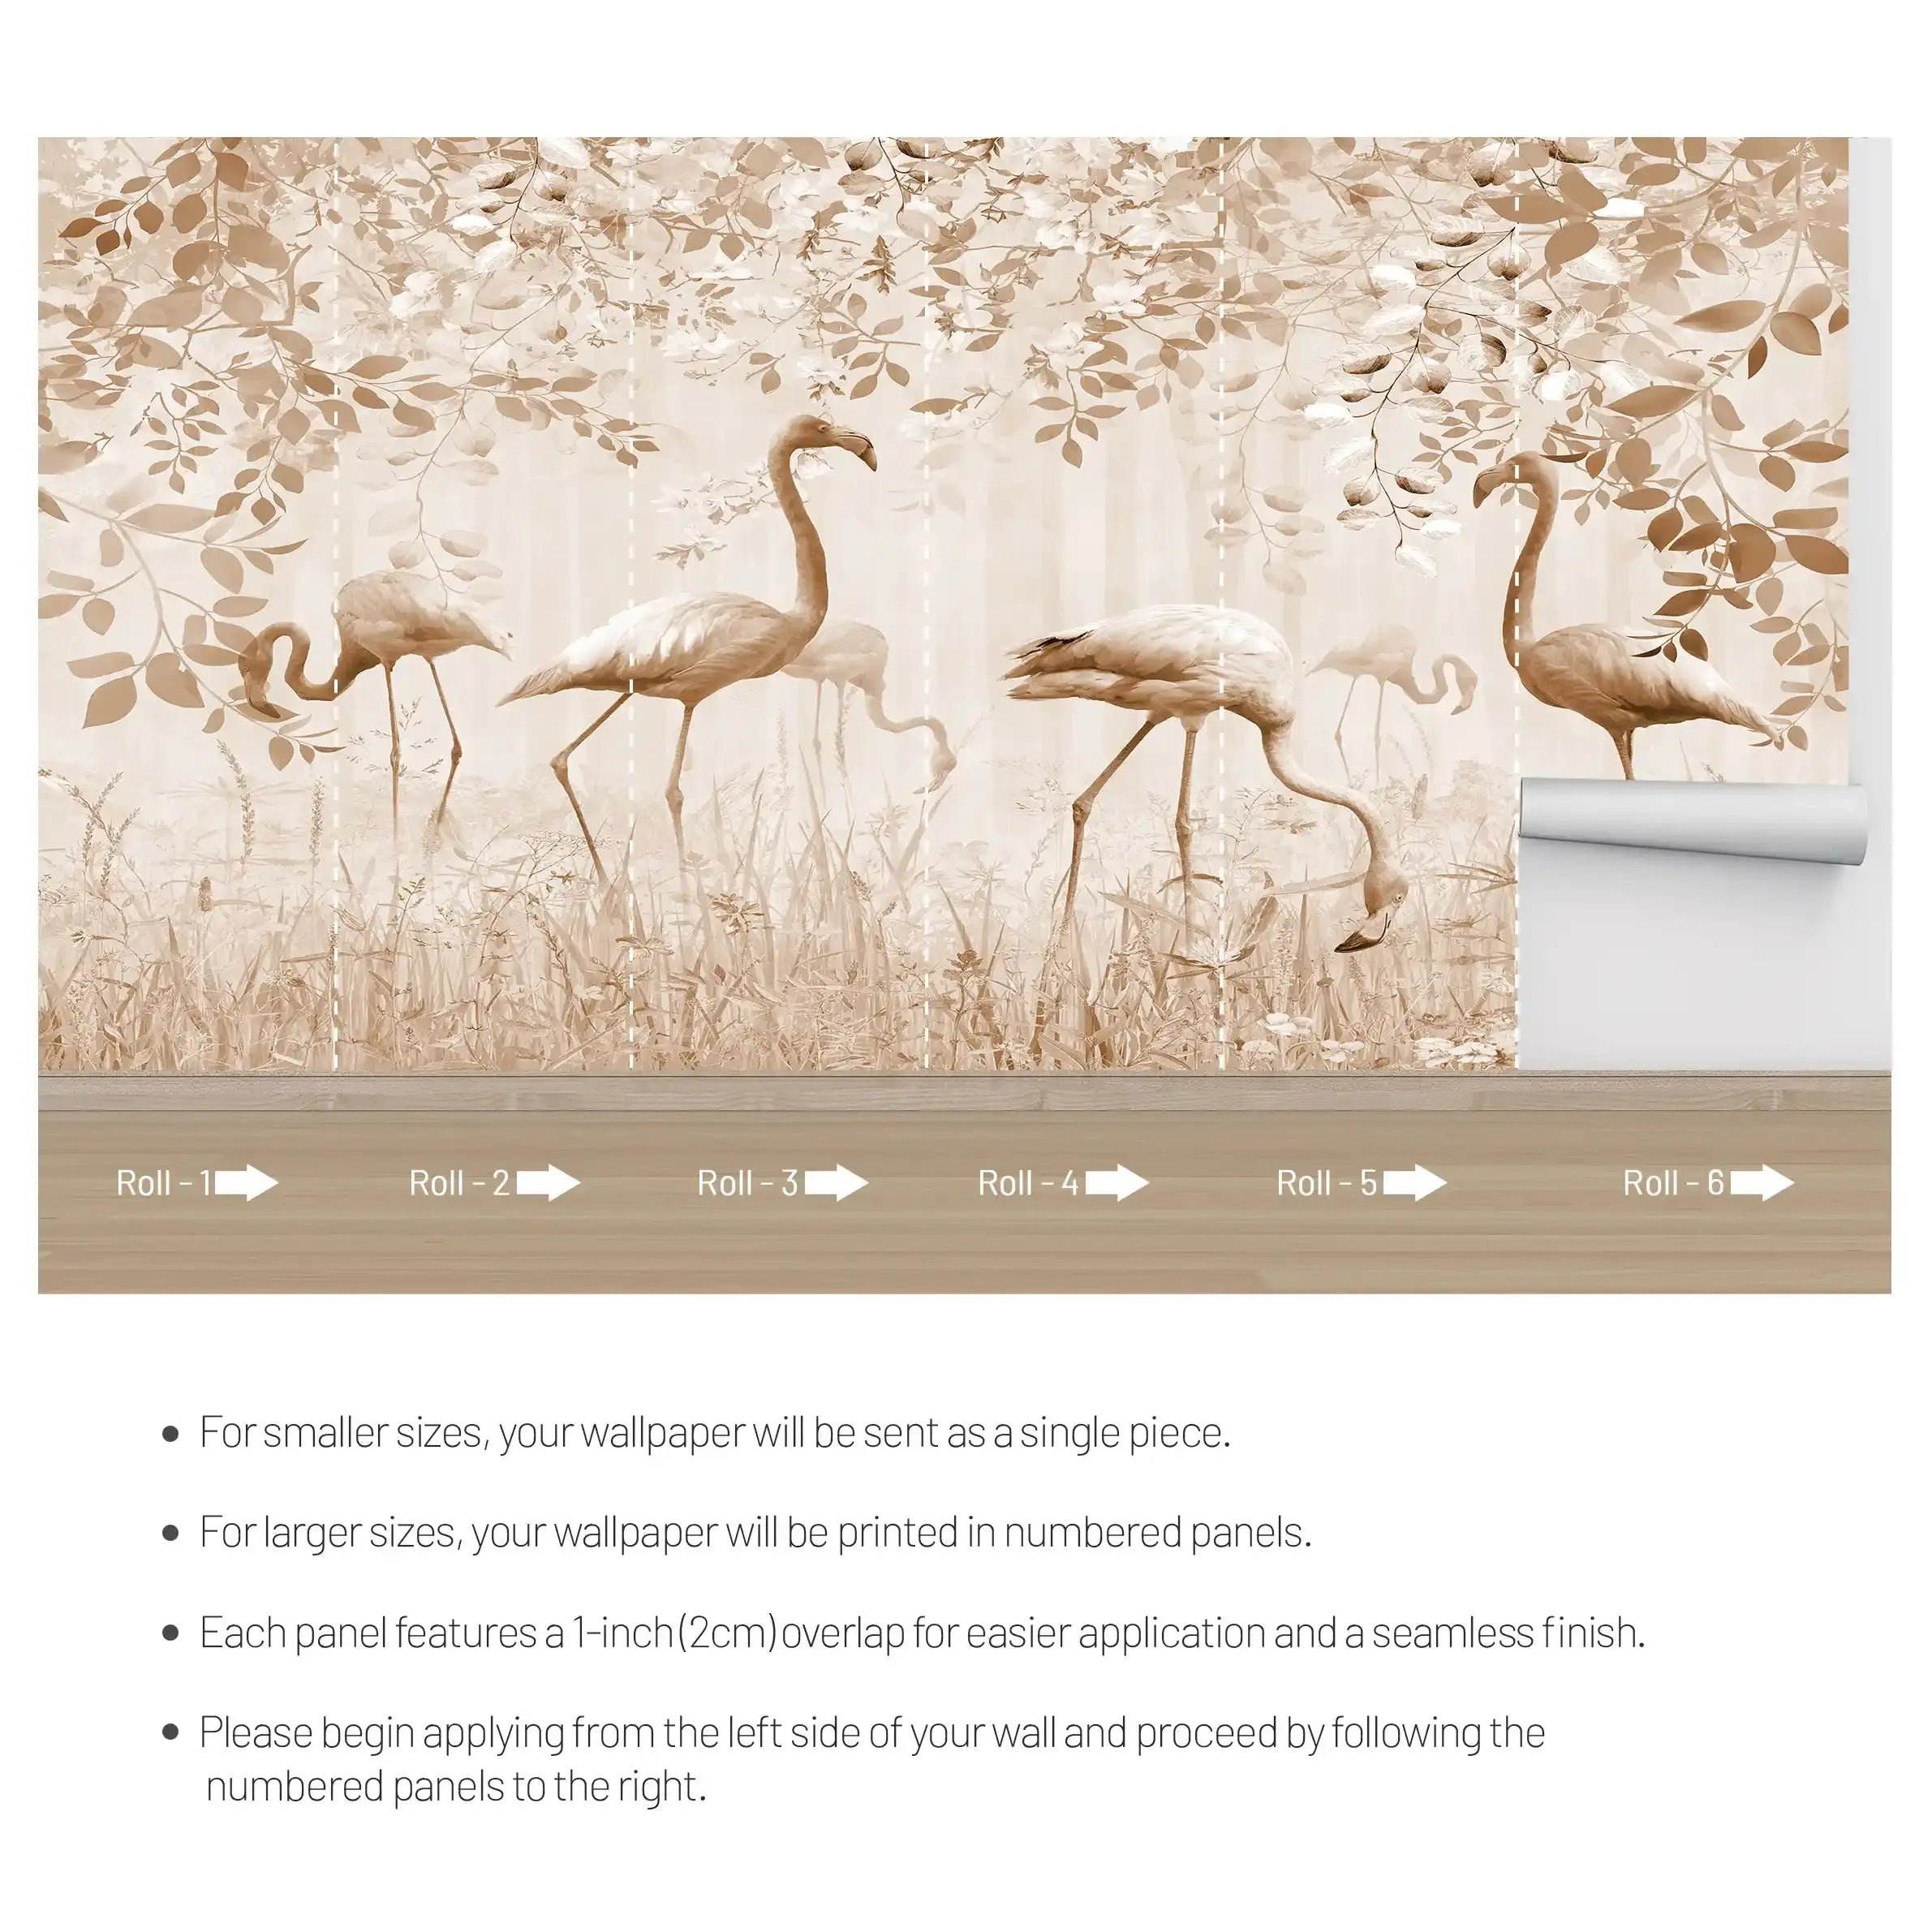 3054-D / Peel and Stick Wallpaper with Brown FlamingoBoho WallPaper for Wall Decor, Easy Install, Removable for Nursery, Bathroom, Bedroom - Artevella